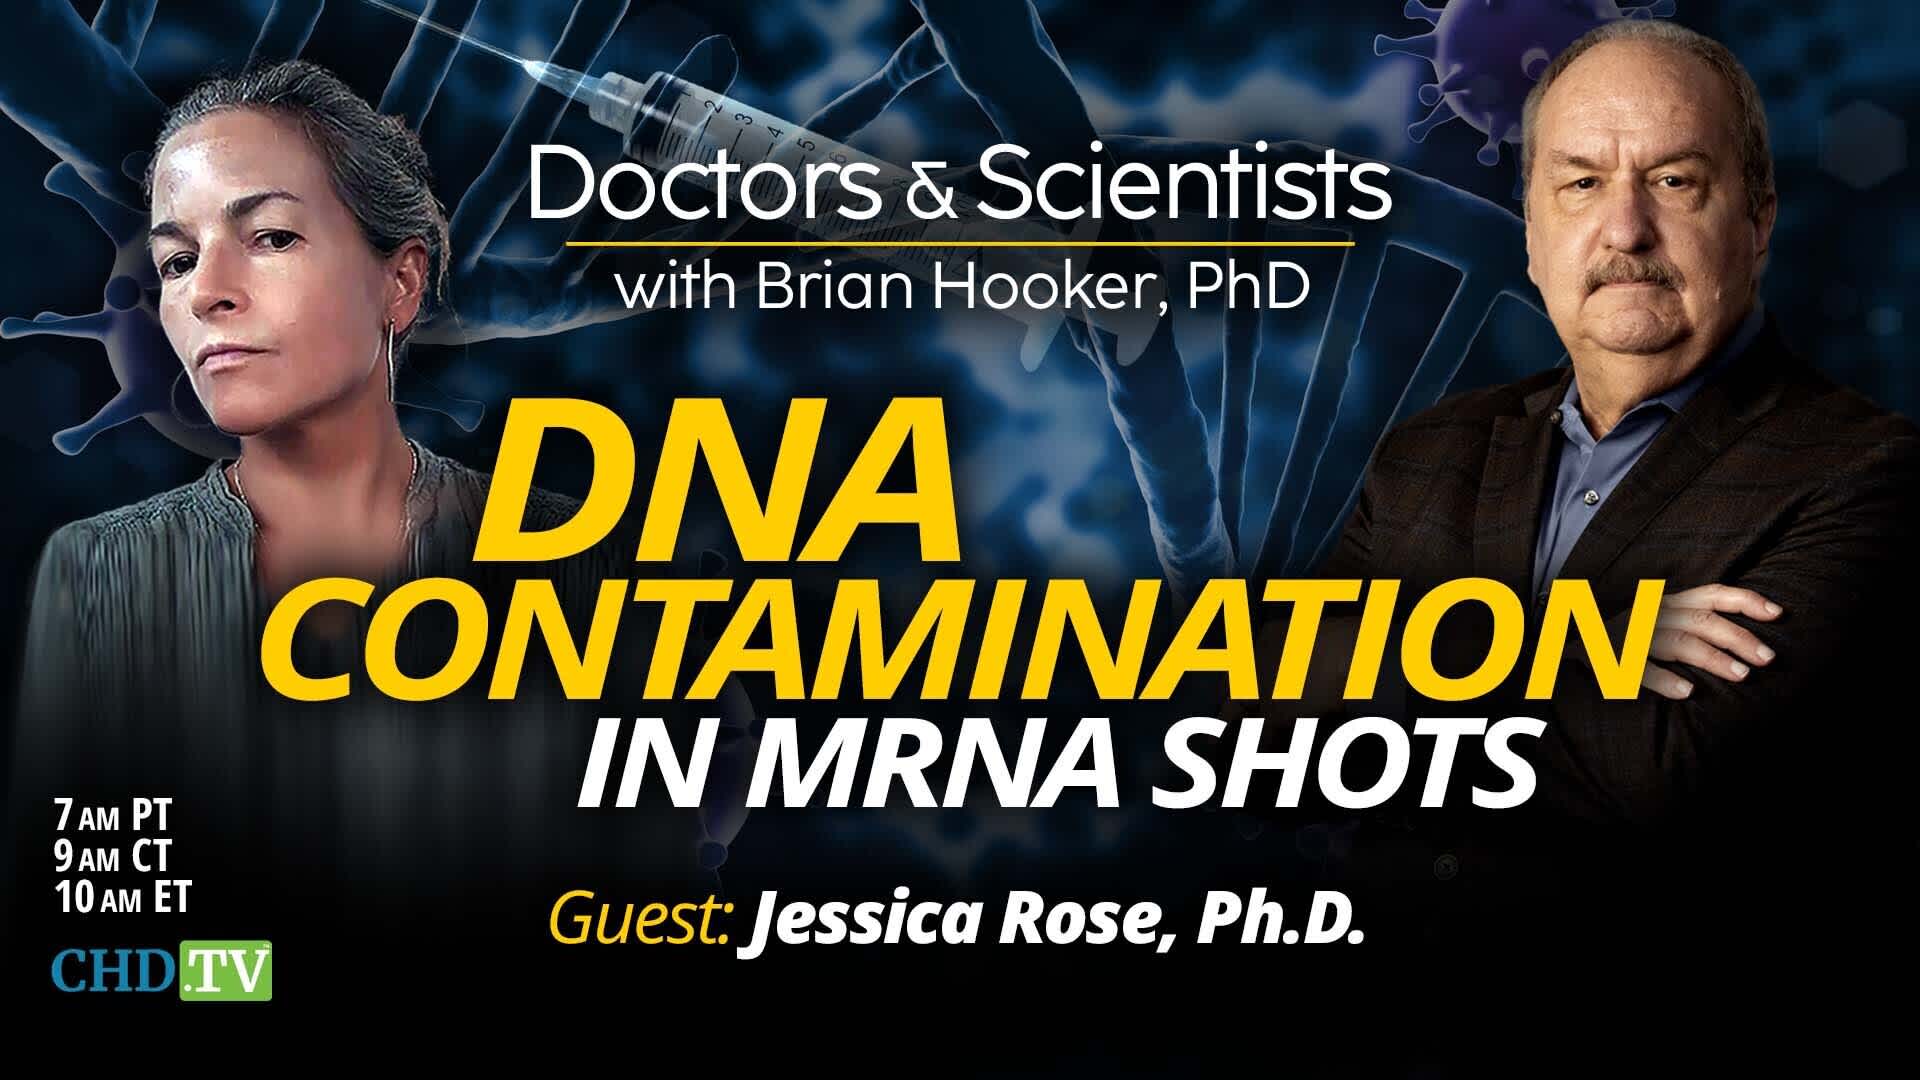 DNA Contamination in mRNA Shots With Jessica Rose, Ph.D.